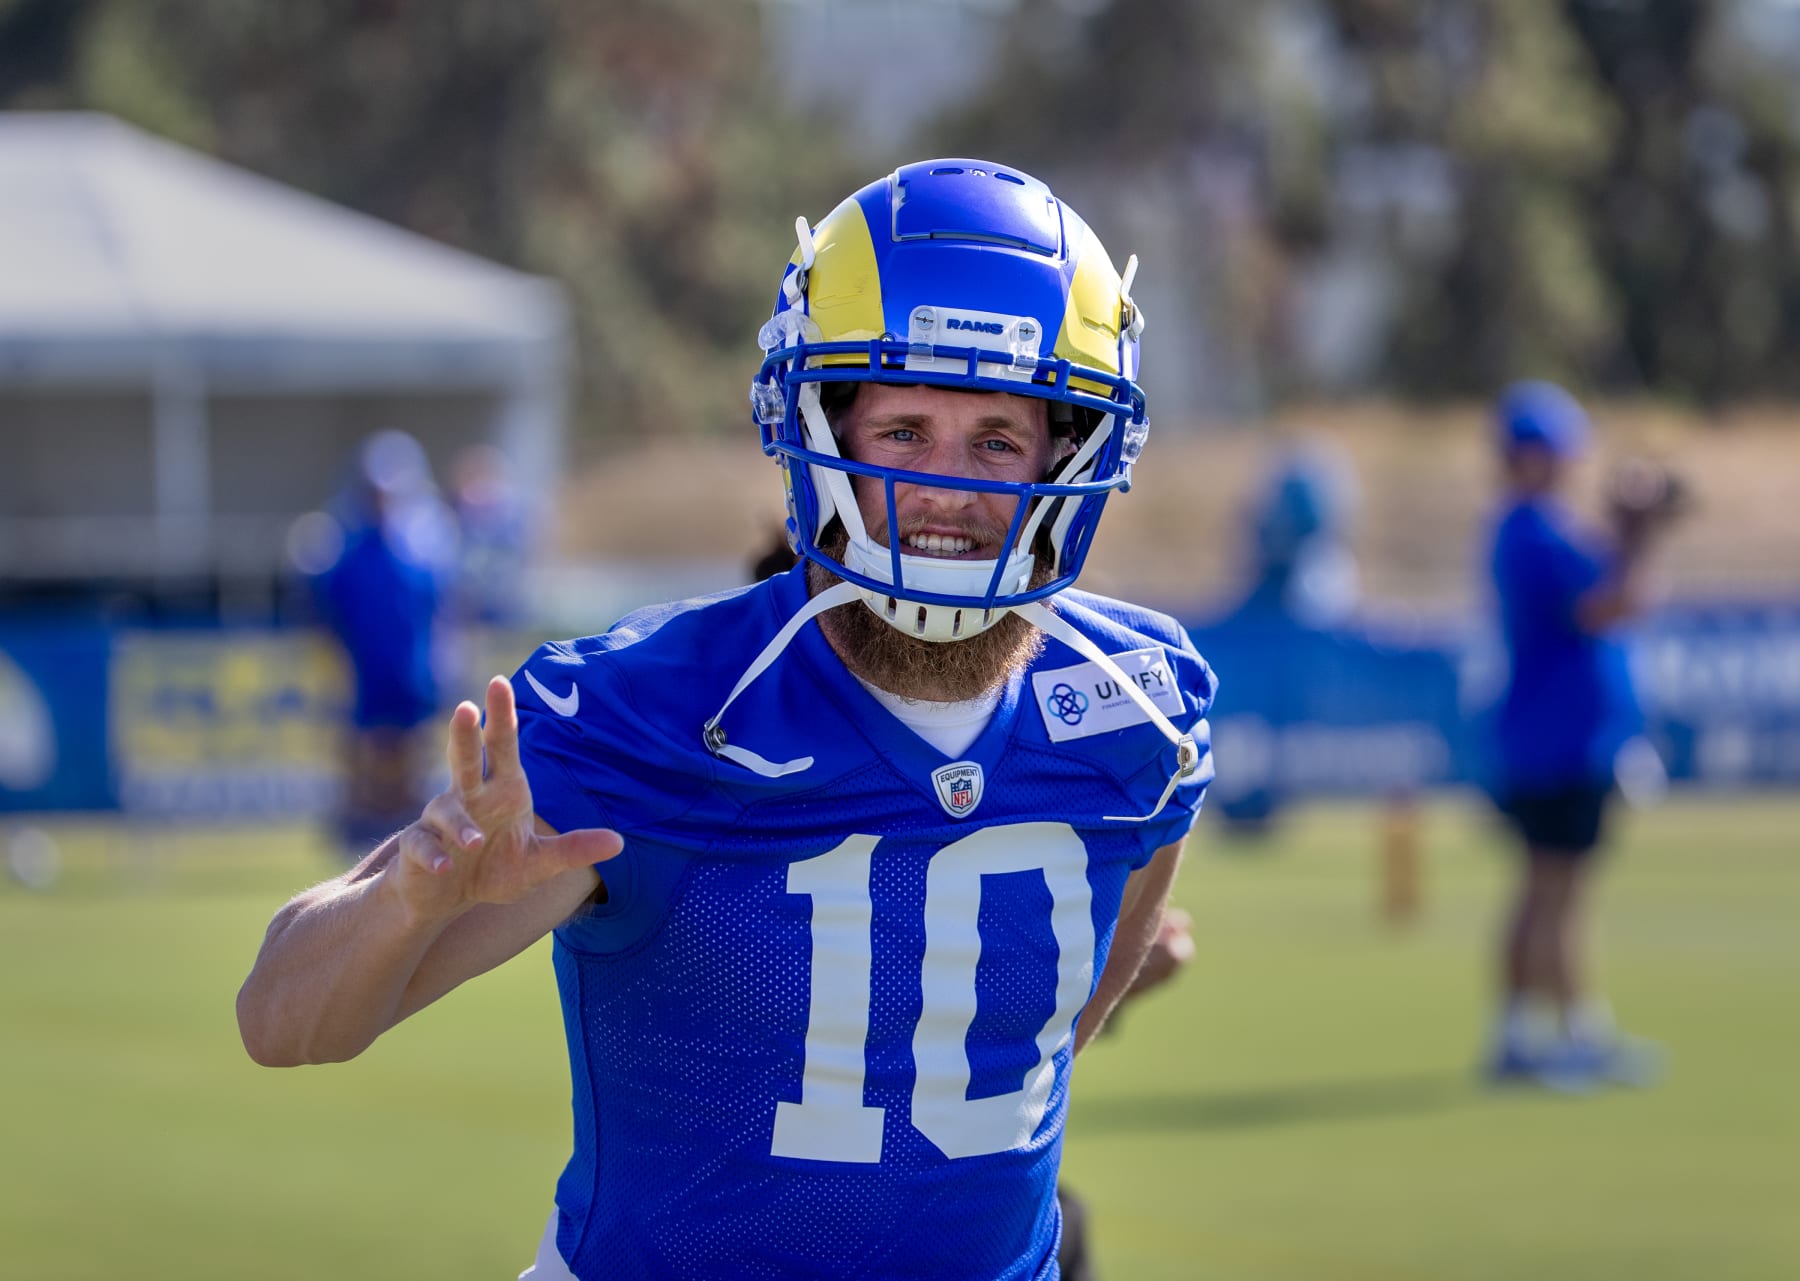 Cooper Kupp: He and Rams trainers 'all feel good about where we're at, feel  like we're making good time on things' with ankle rehab